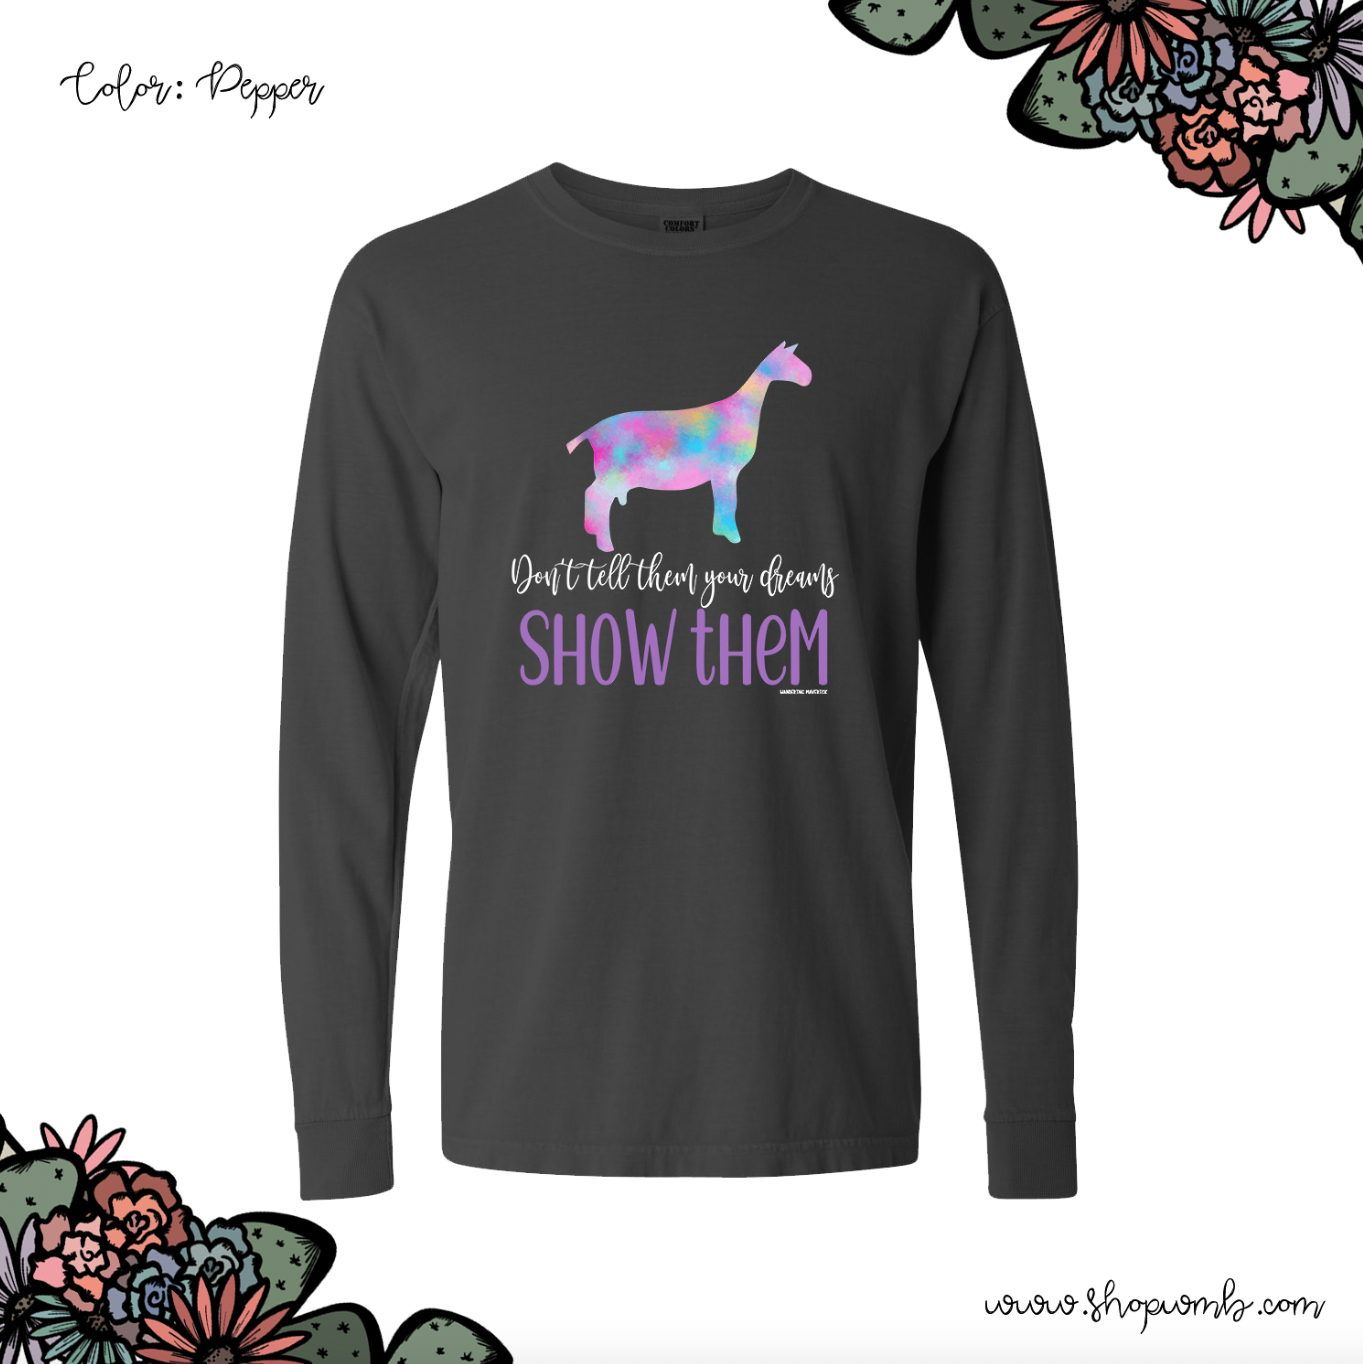 Show Them Dairy Goat LONG SLEEVE T-Shirt (S-3XL) - Multiple Colors!